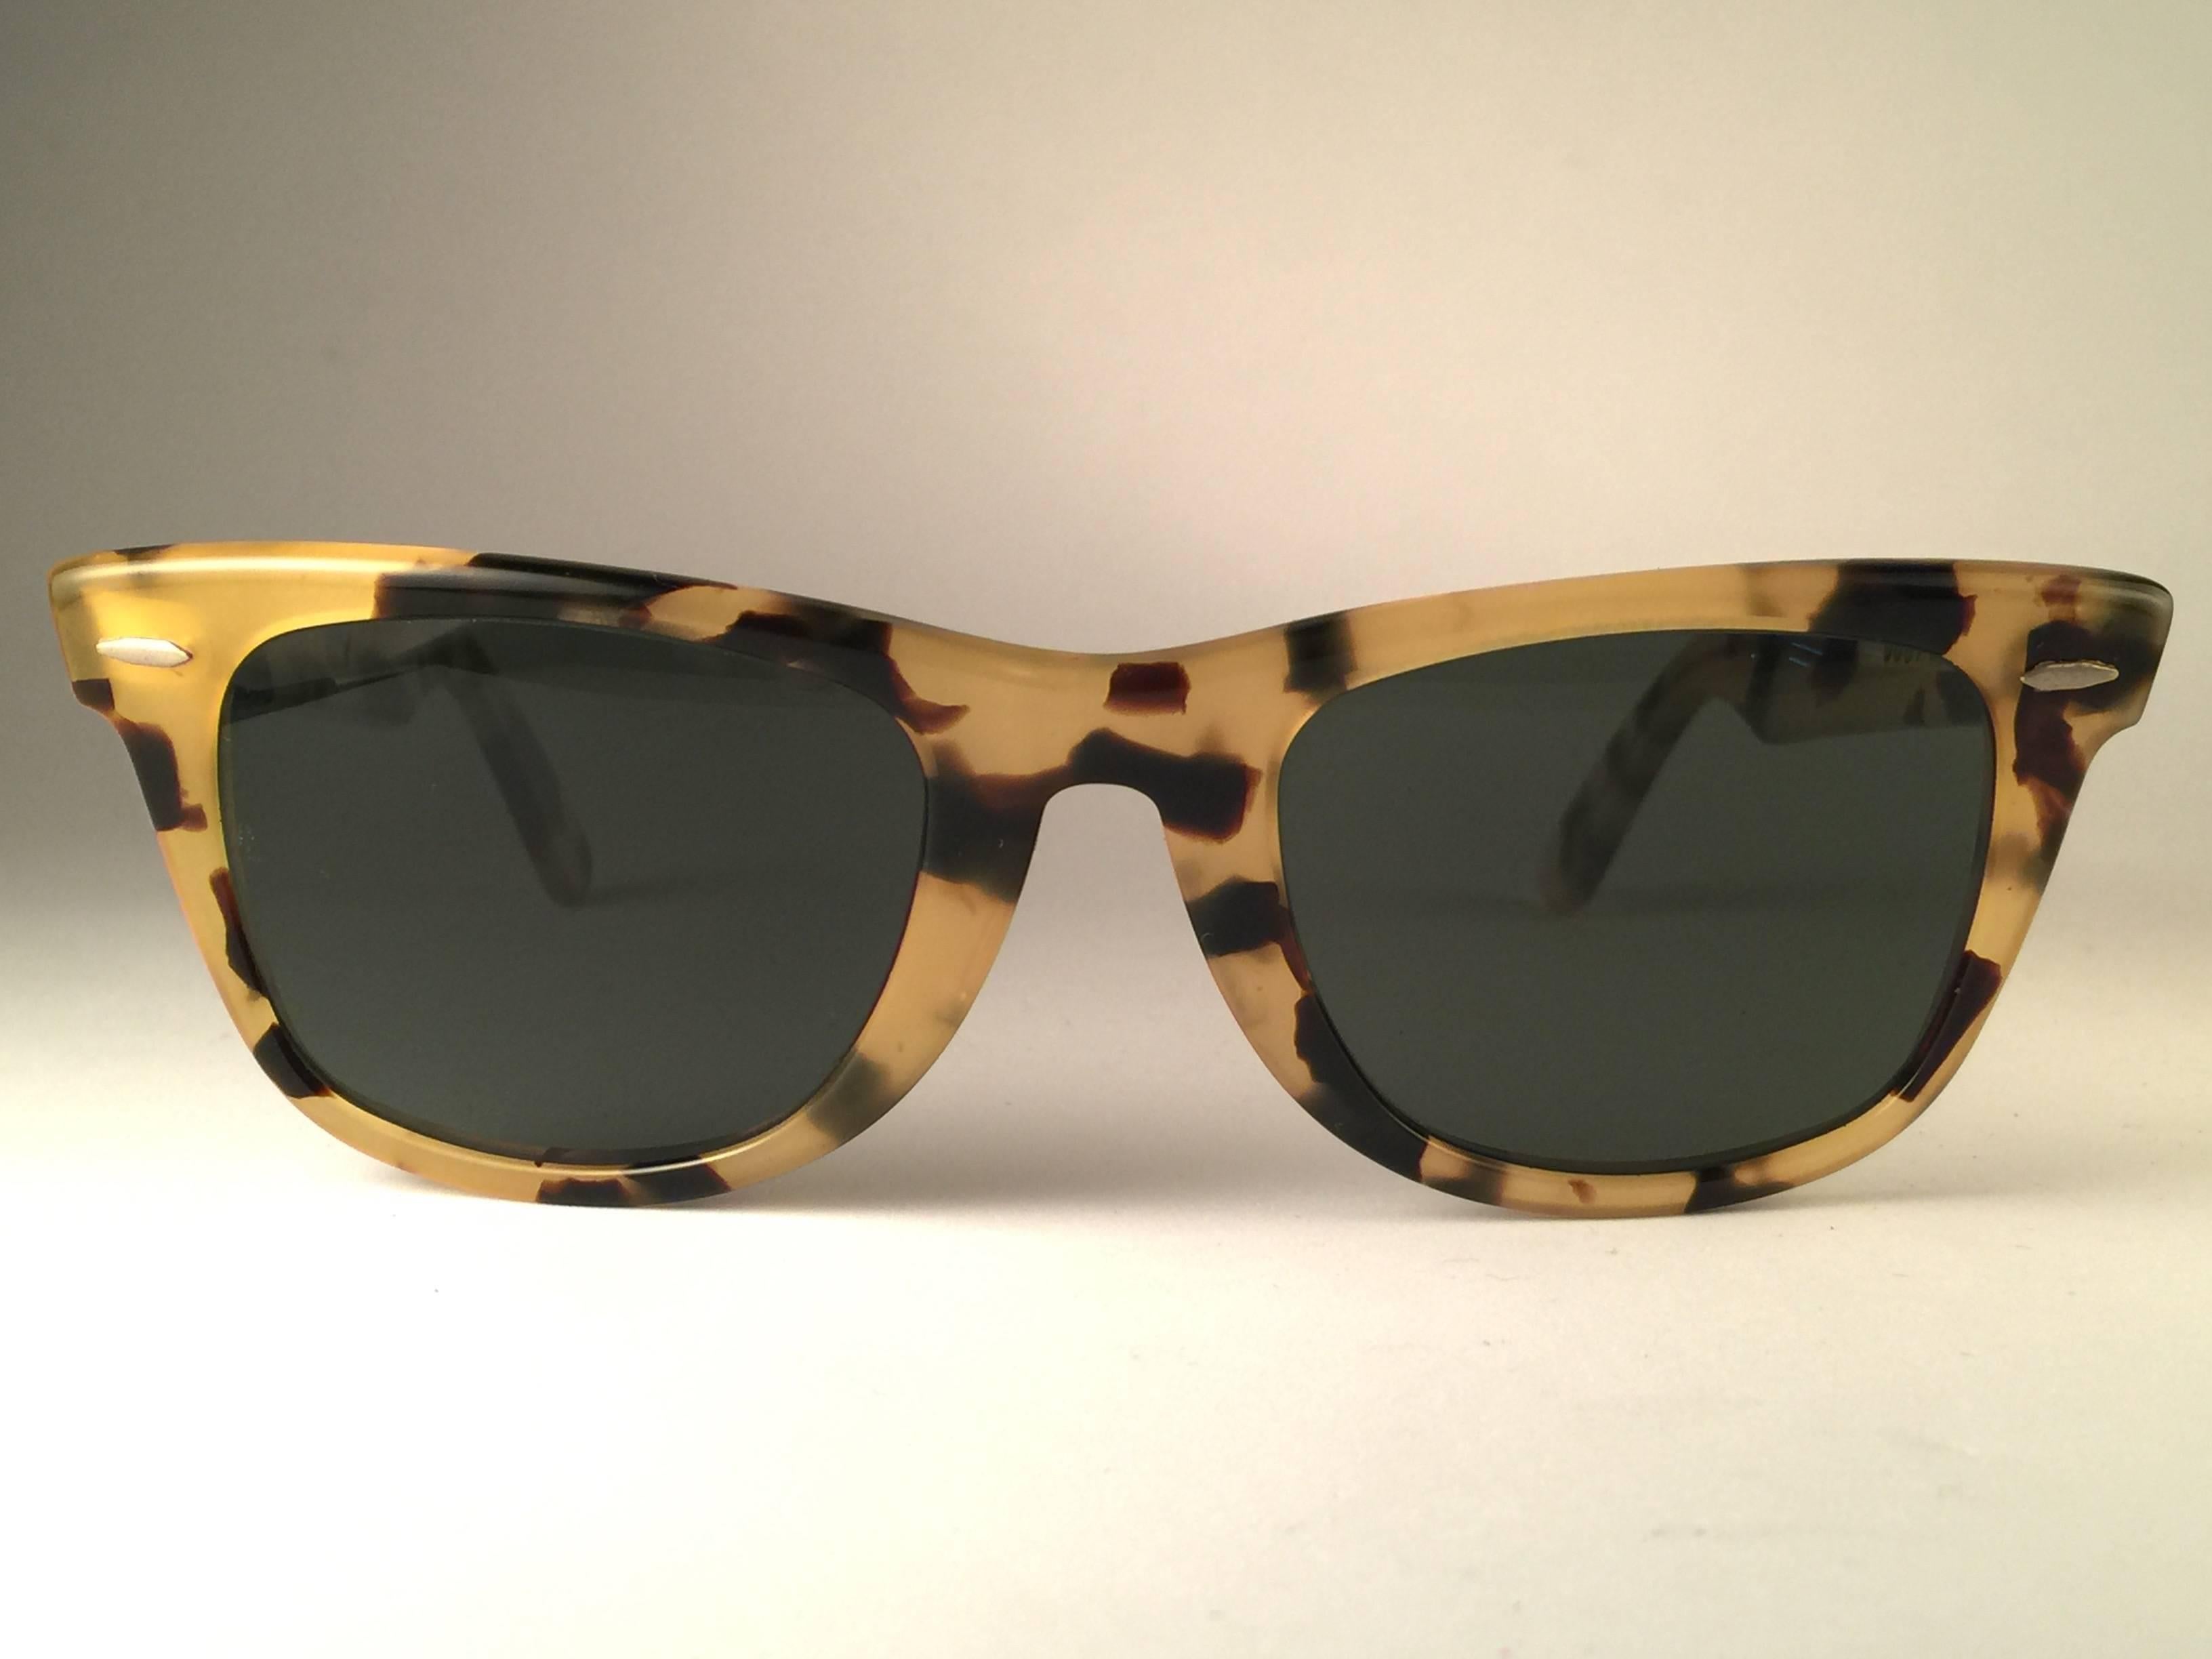 Mint classic Wayfarer in light tortoise. 
B&L etched in both G15 grey lenses. Please notice that this item is nearly 40 years old and show some storage wear.  

Made in USA.